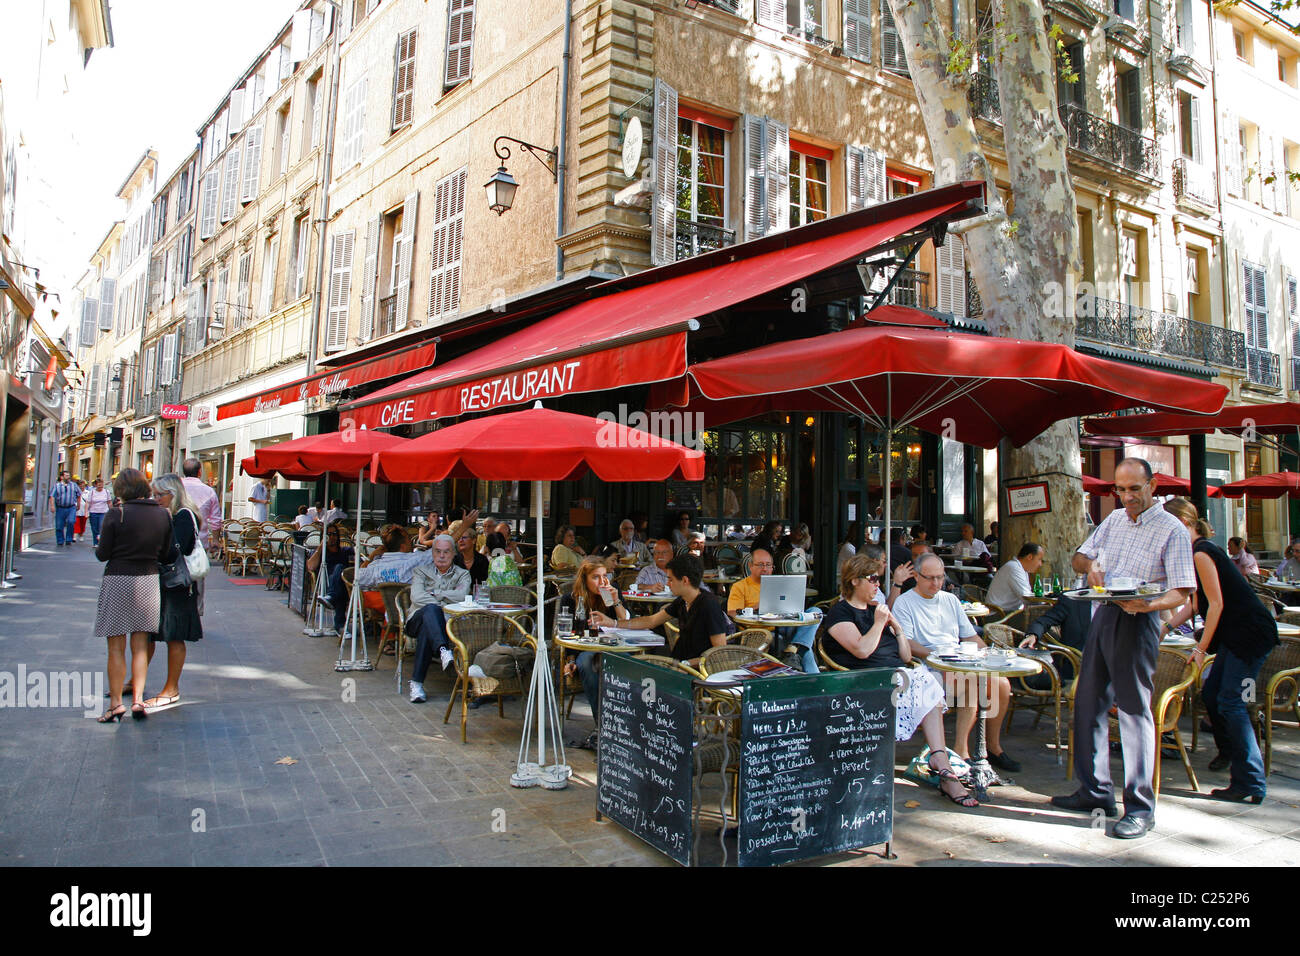 Cafe on the Cours Mirabeau, Aix en Provence, Bouches du Rhone,  Provence, France. Stock Photo